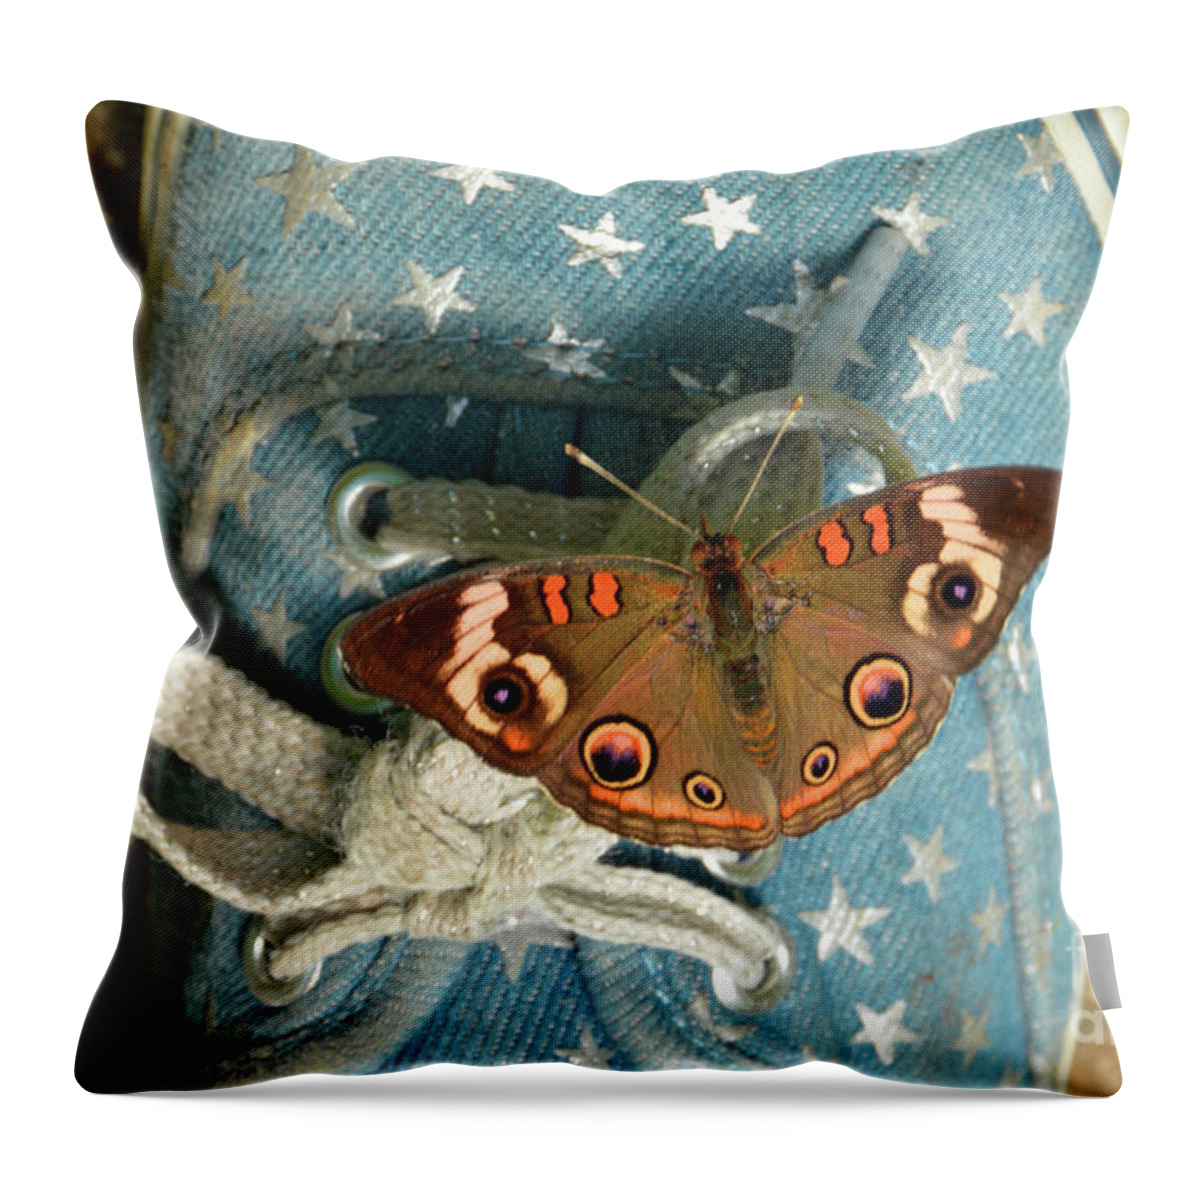 Butterfly Throw Pillow featuring the photograph Let Your Spirit Fly Free- Butterfly Nature Art by Robyn King